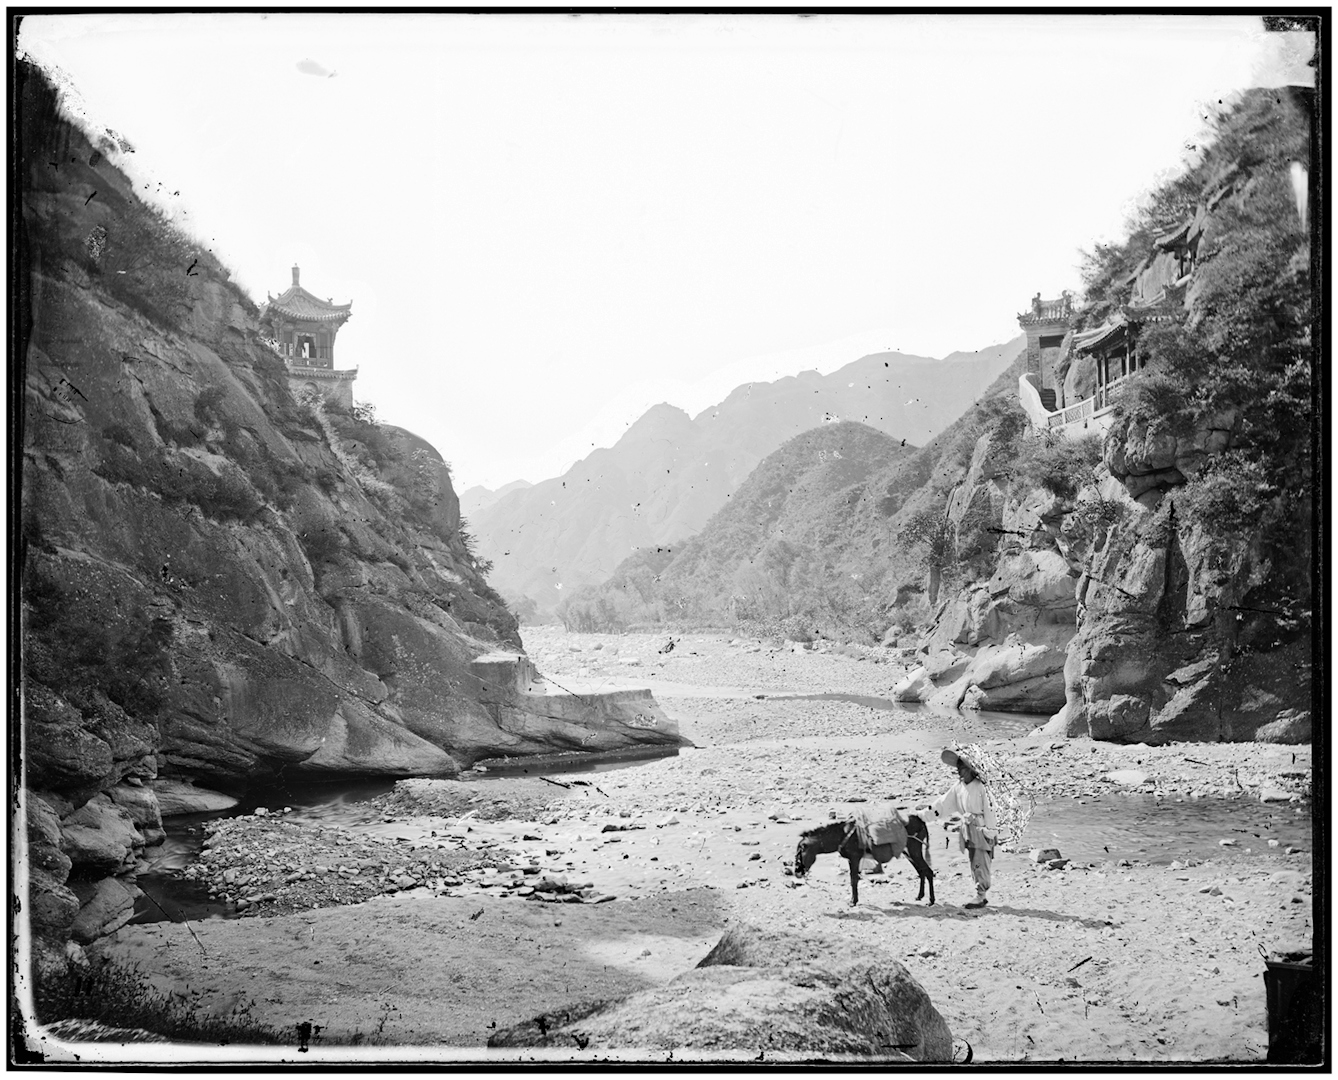 Black and white photograph of a mountain pass. A rough road runs between steep rocky cliffs, with wooden buildings balanced on them. A man and his donkey are in the foreground.